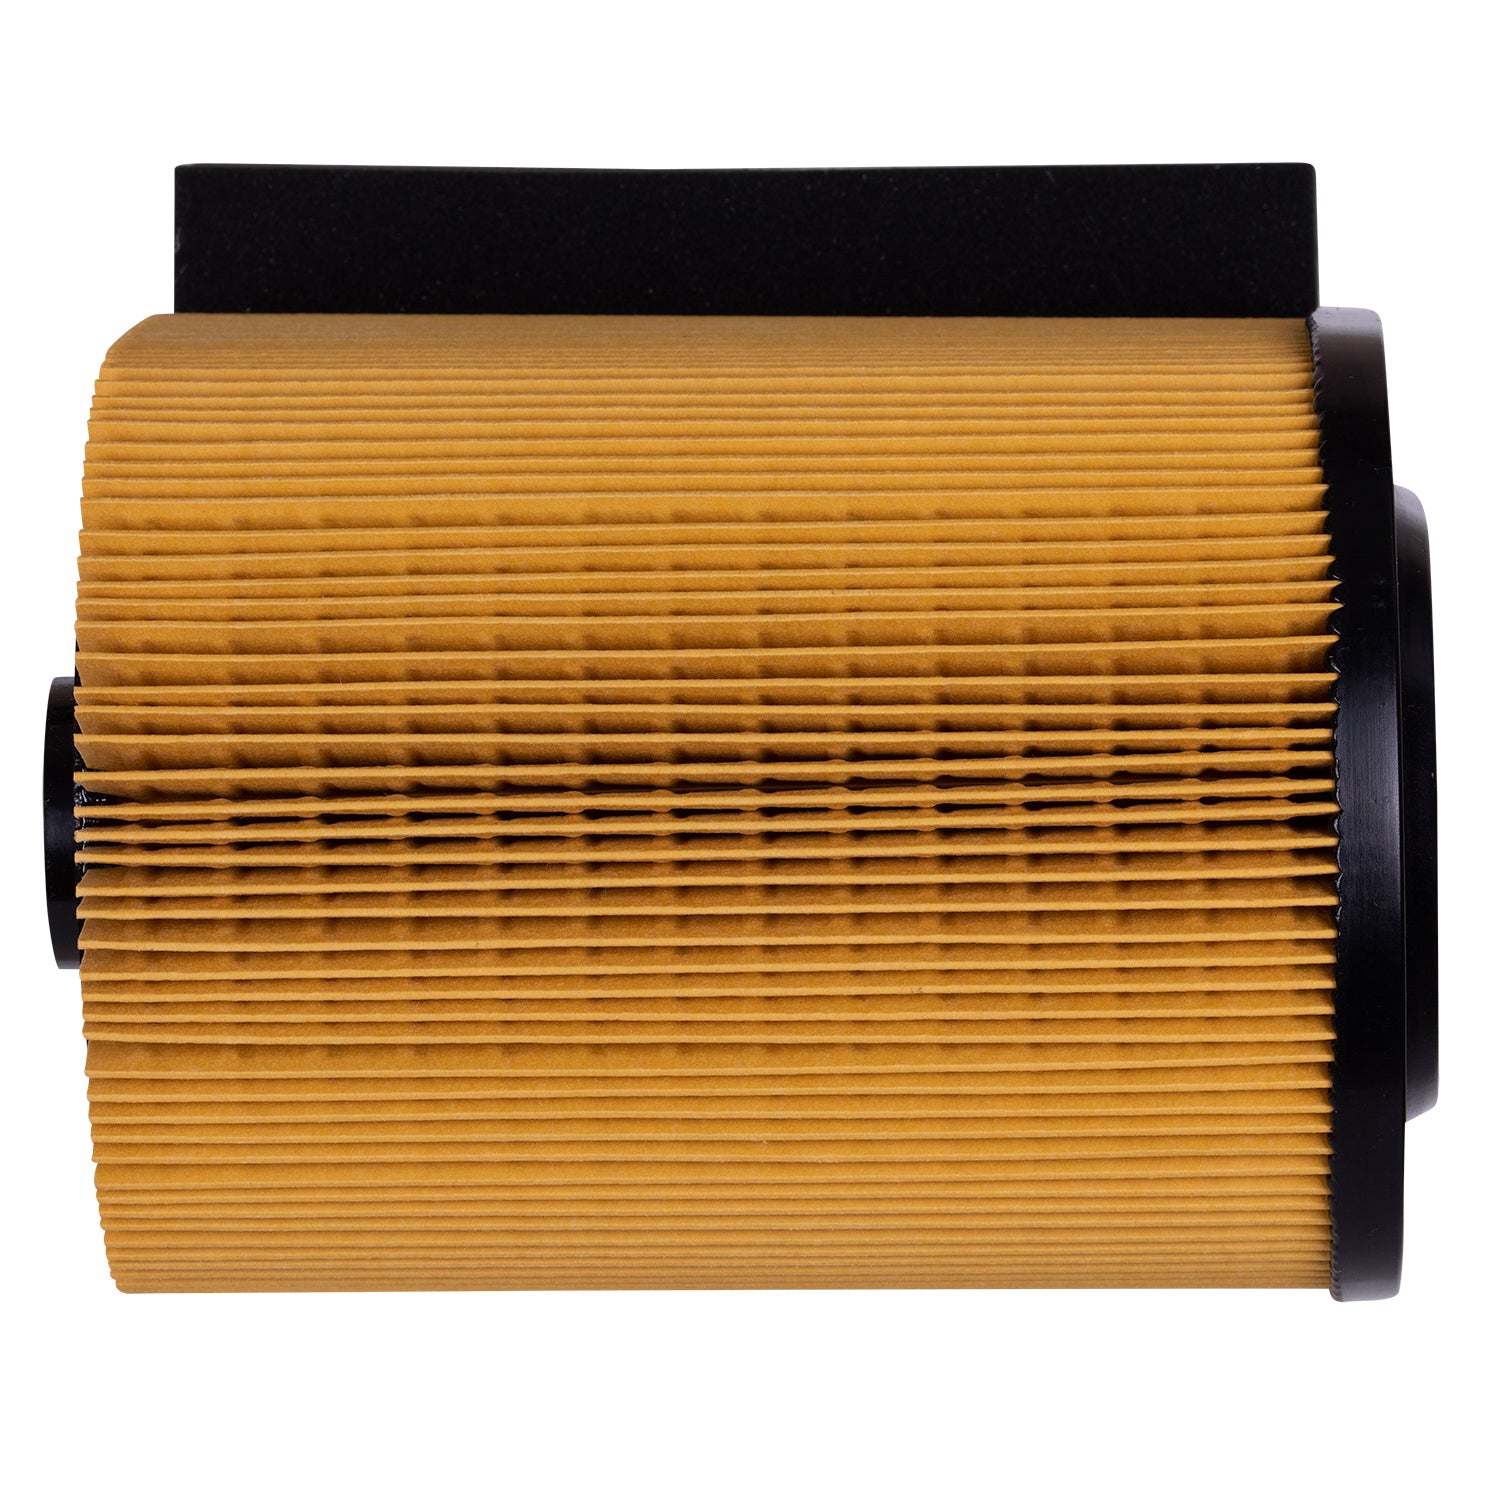 2018 Ford F-550 Super Duty Air Filter  PA8219